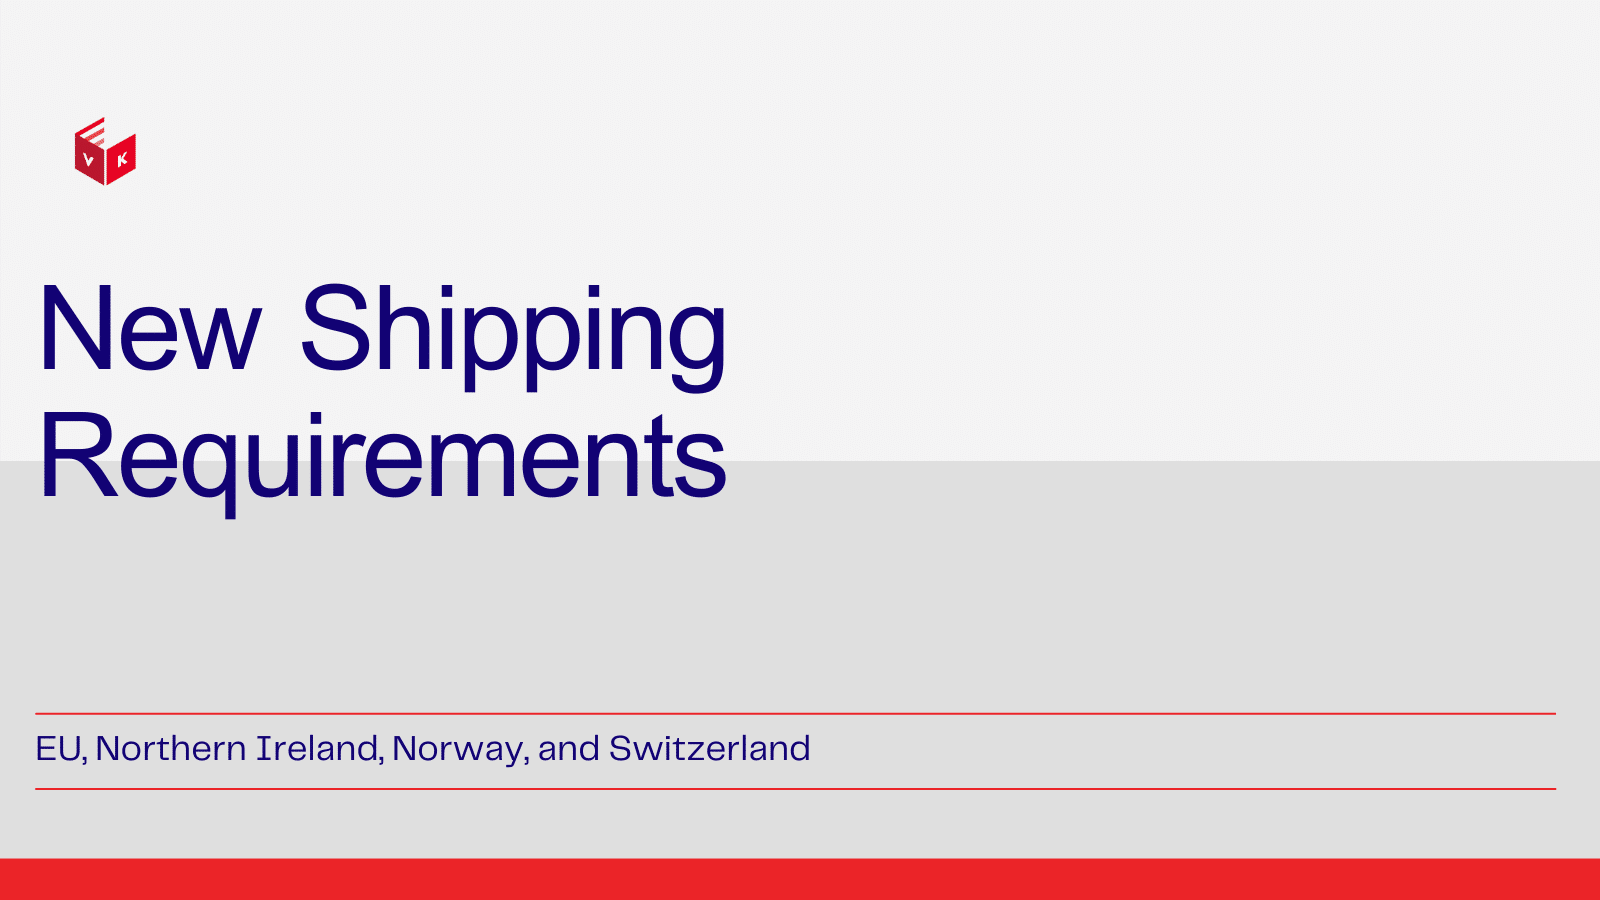 New shipping requirement for EU